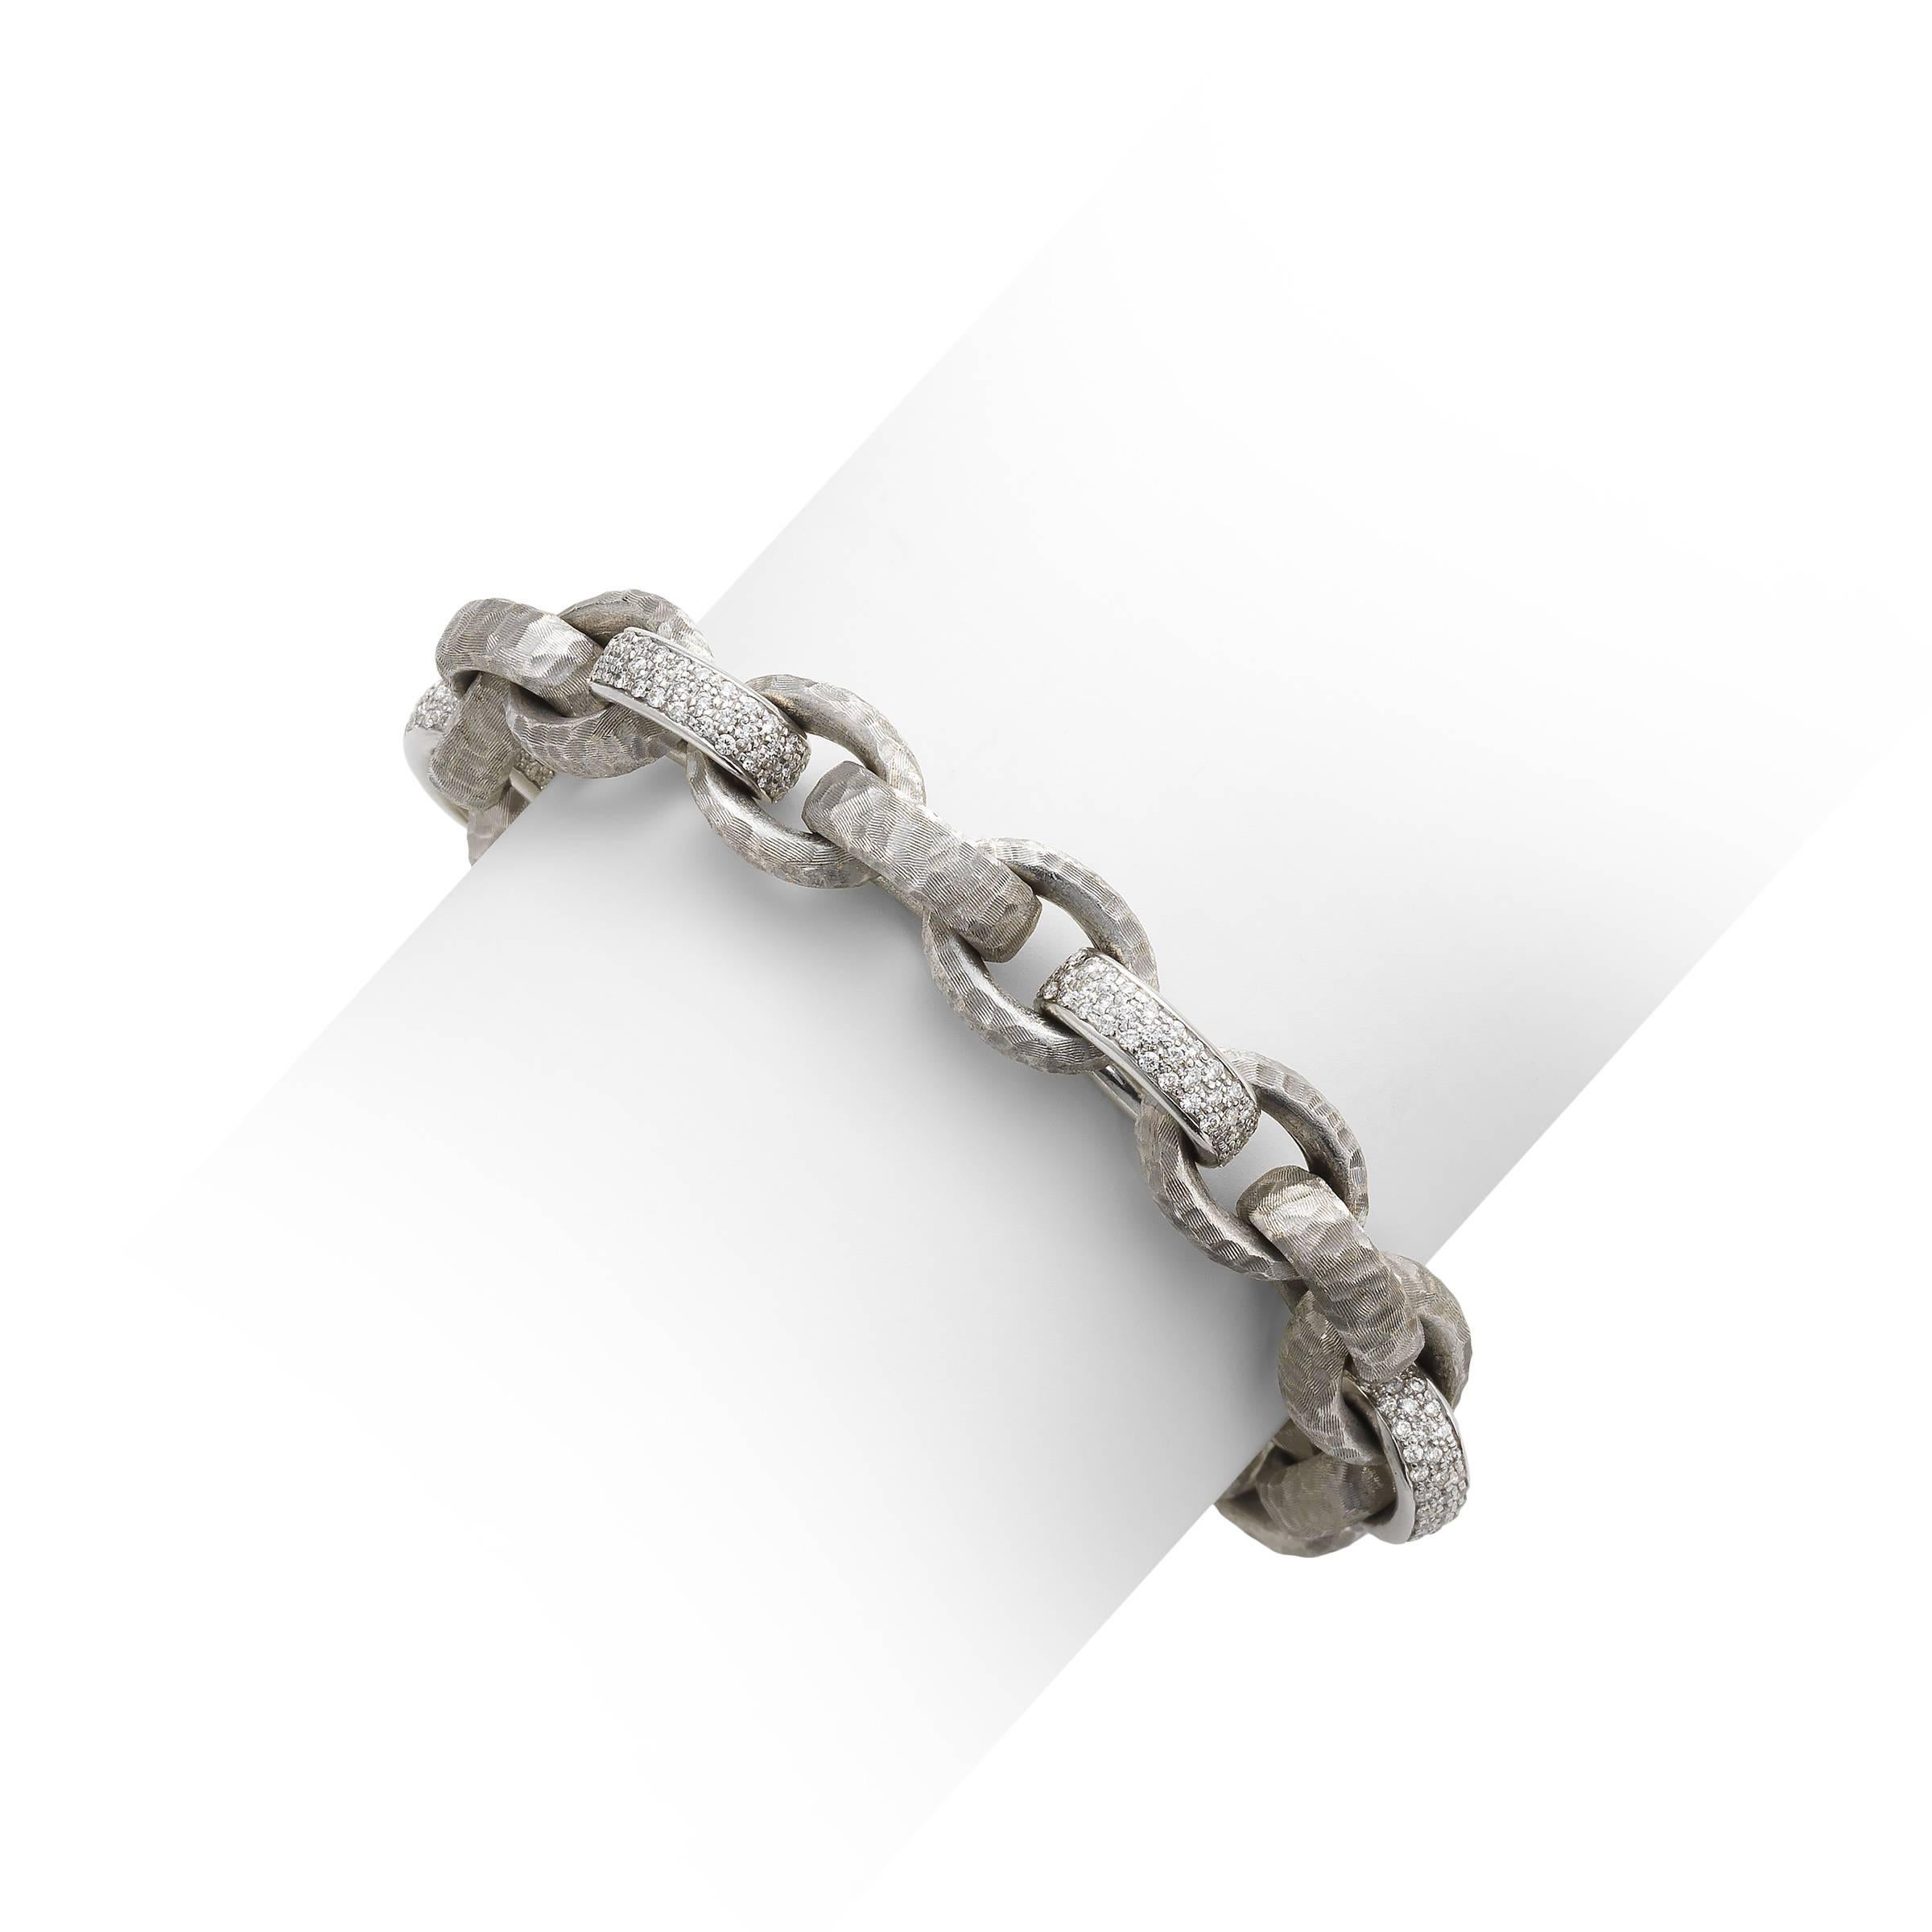 18k White Gold Textured and Diamond Link Bracelet. Designed by Nicolis-Cola. This item is stamped Nicolis-Cola, 18k and ITALY.